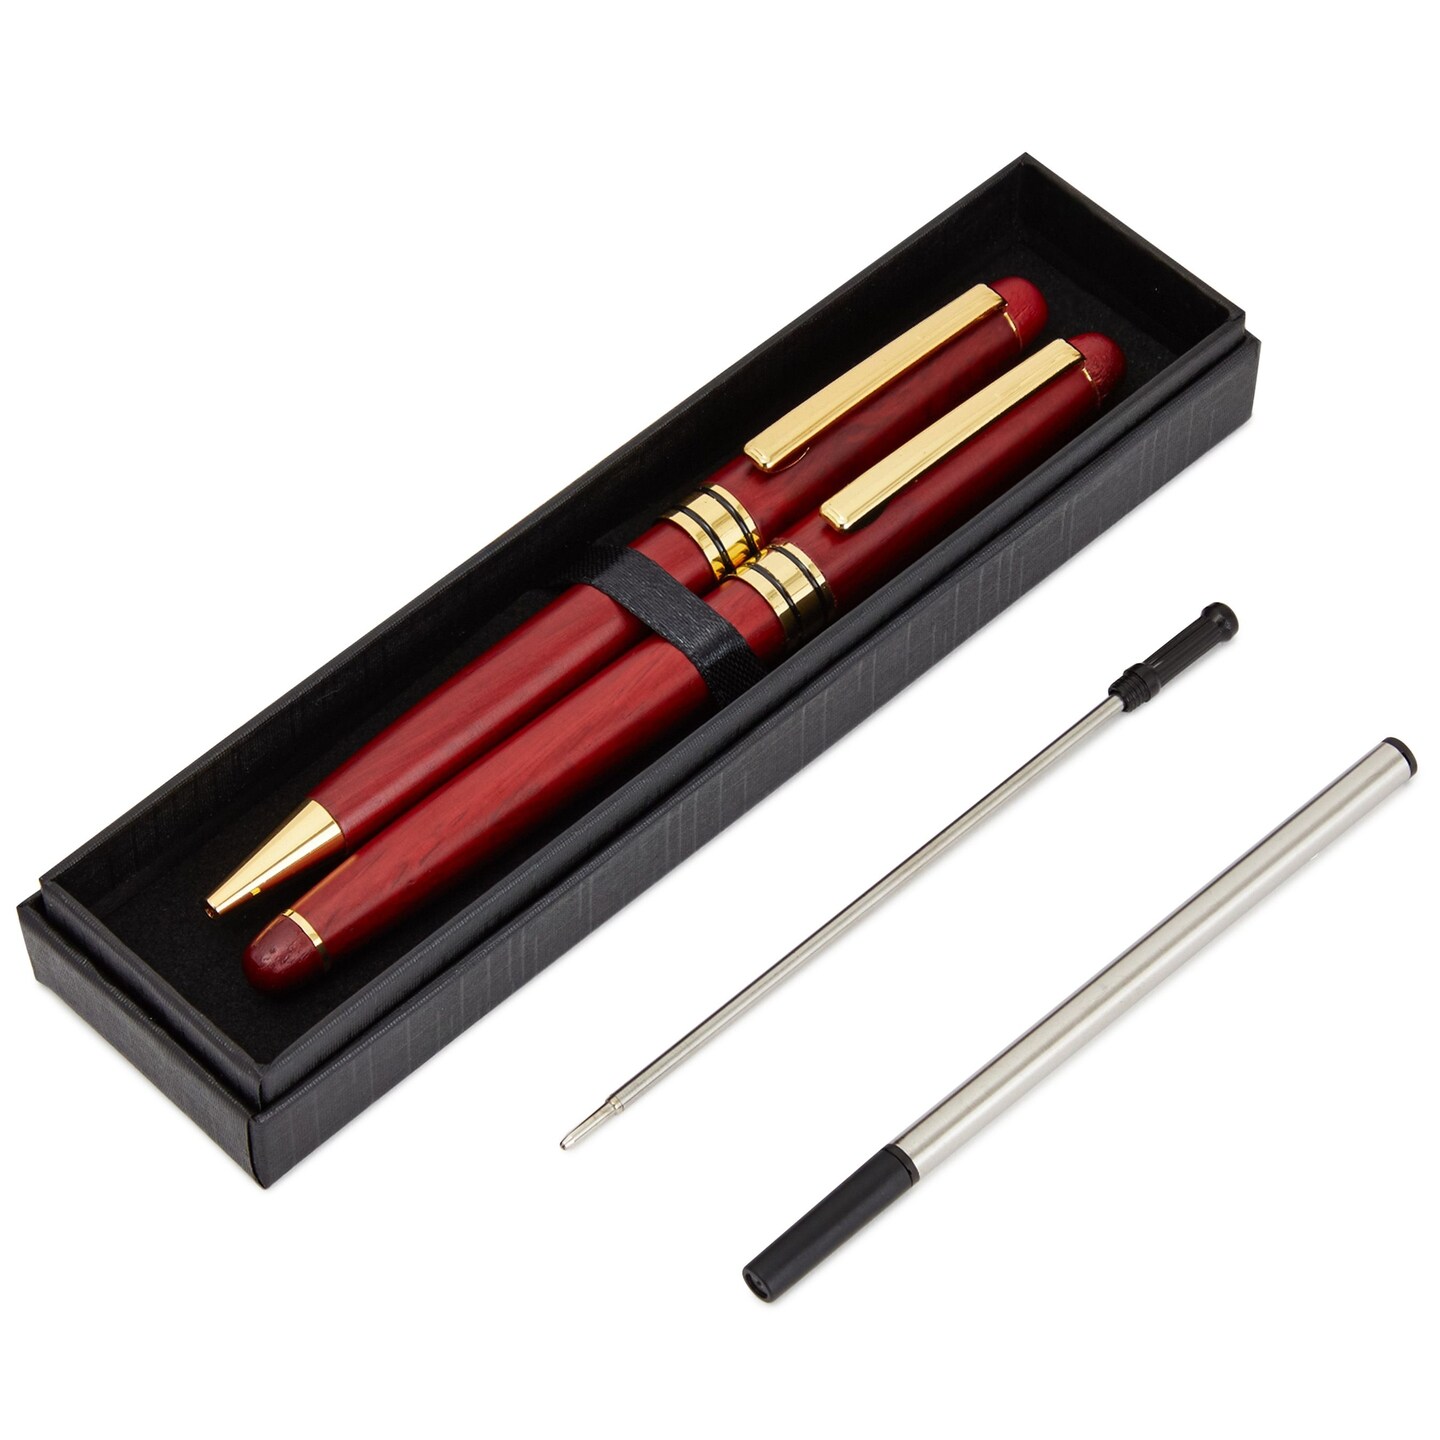 Buy Wooden Pen Gift Box with Company Logo